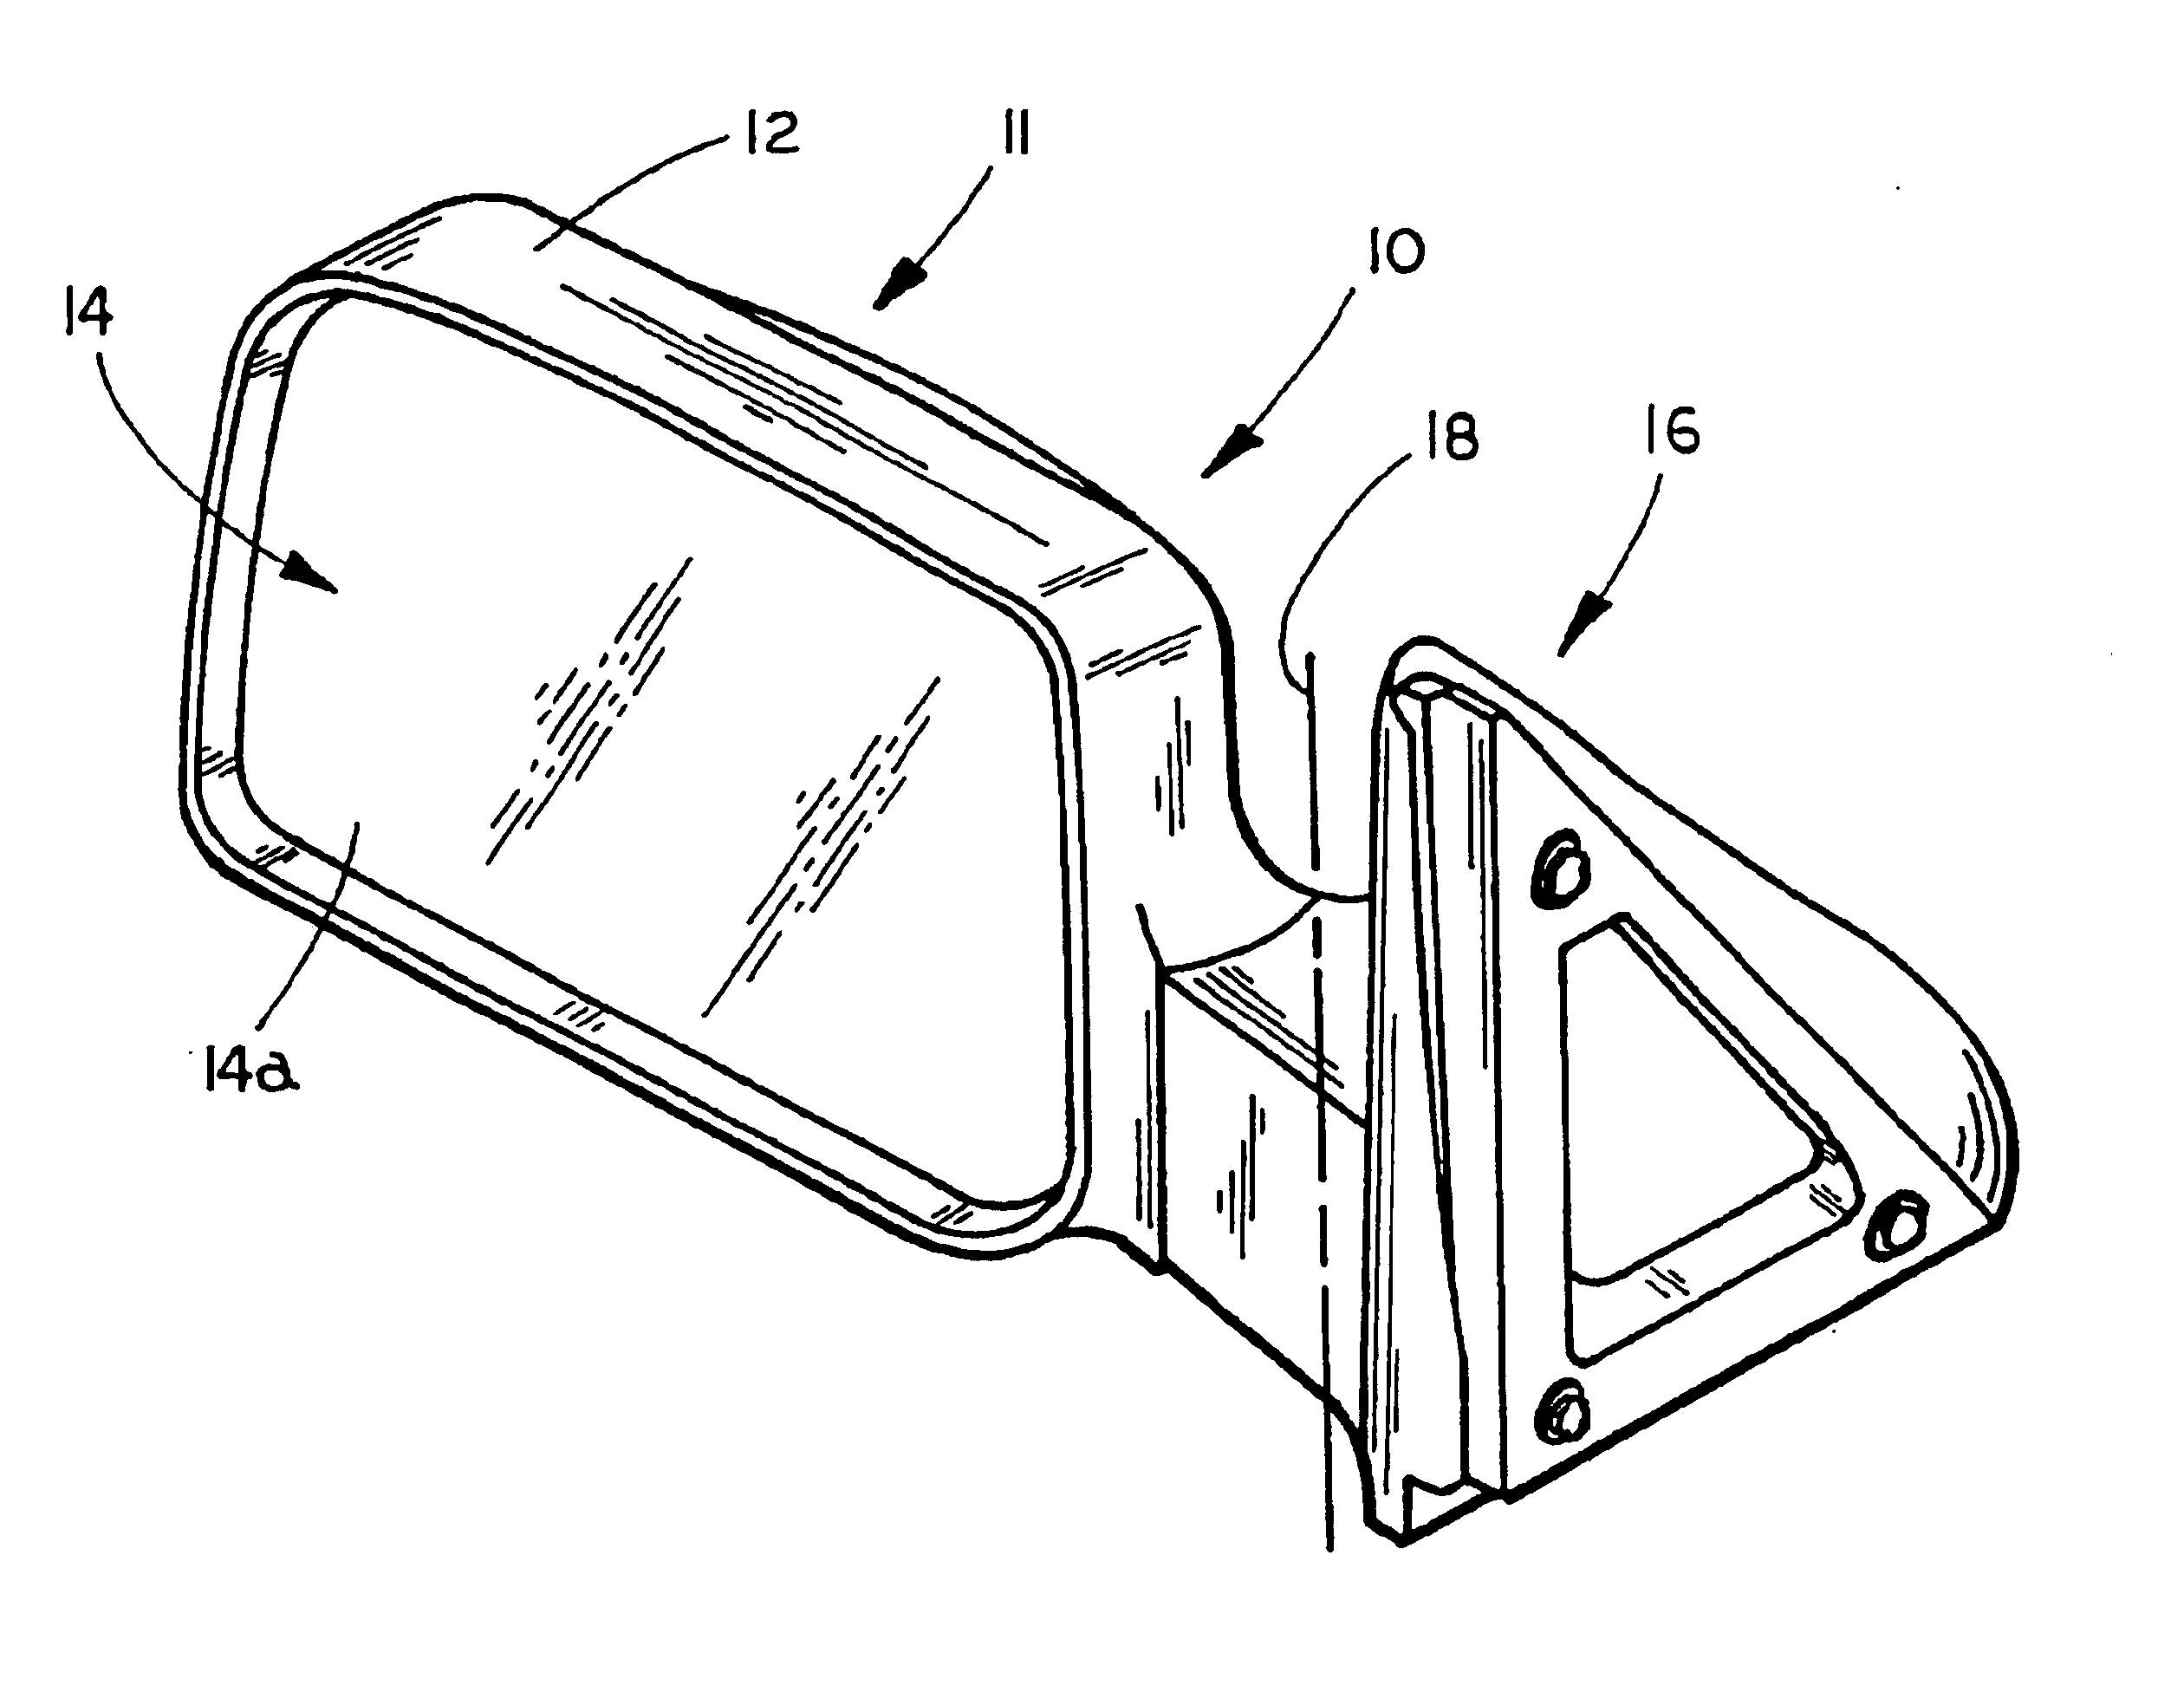 Vehicle exterior rearview mirror assembly